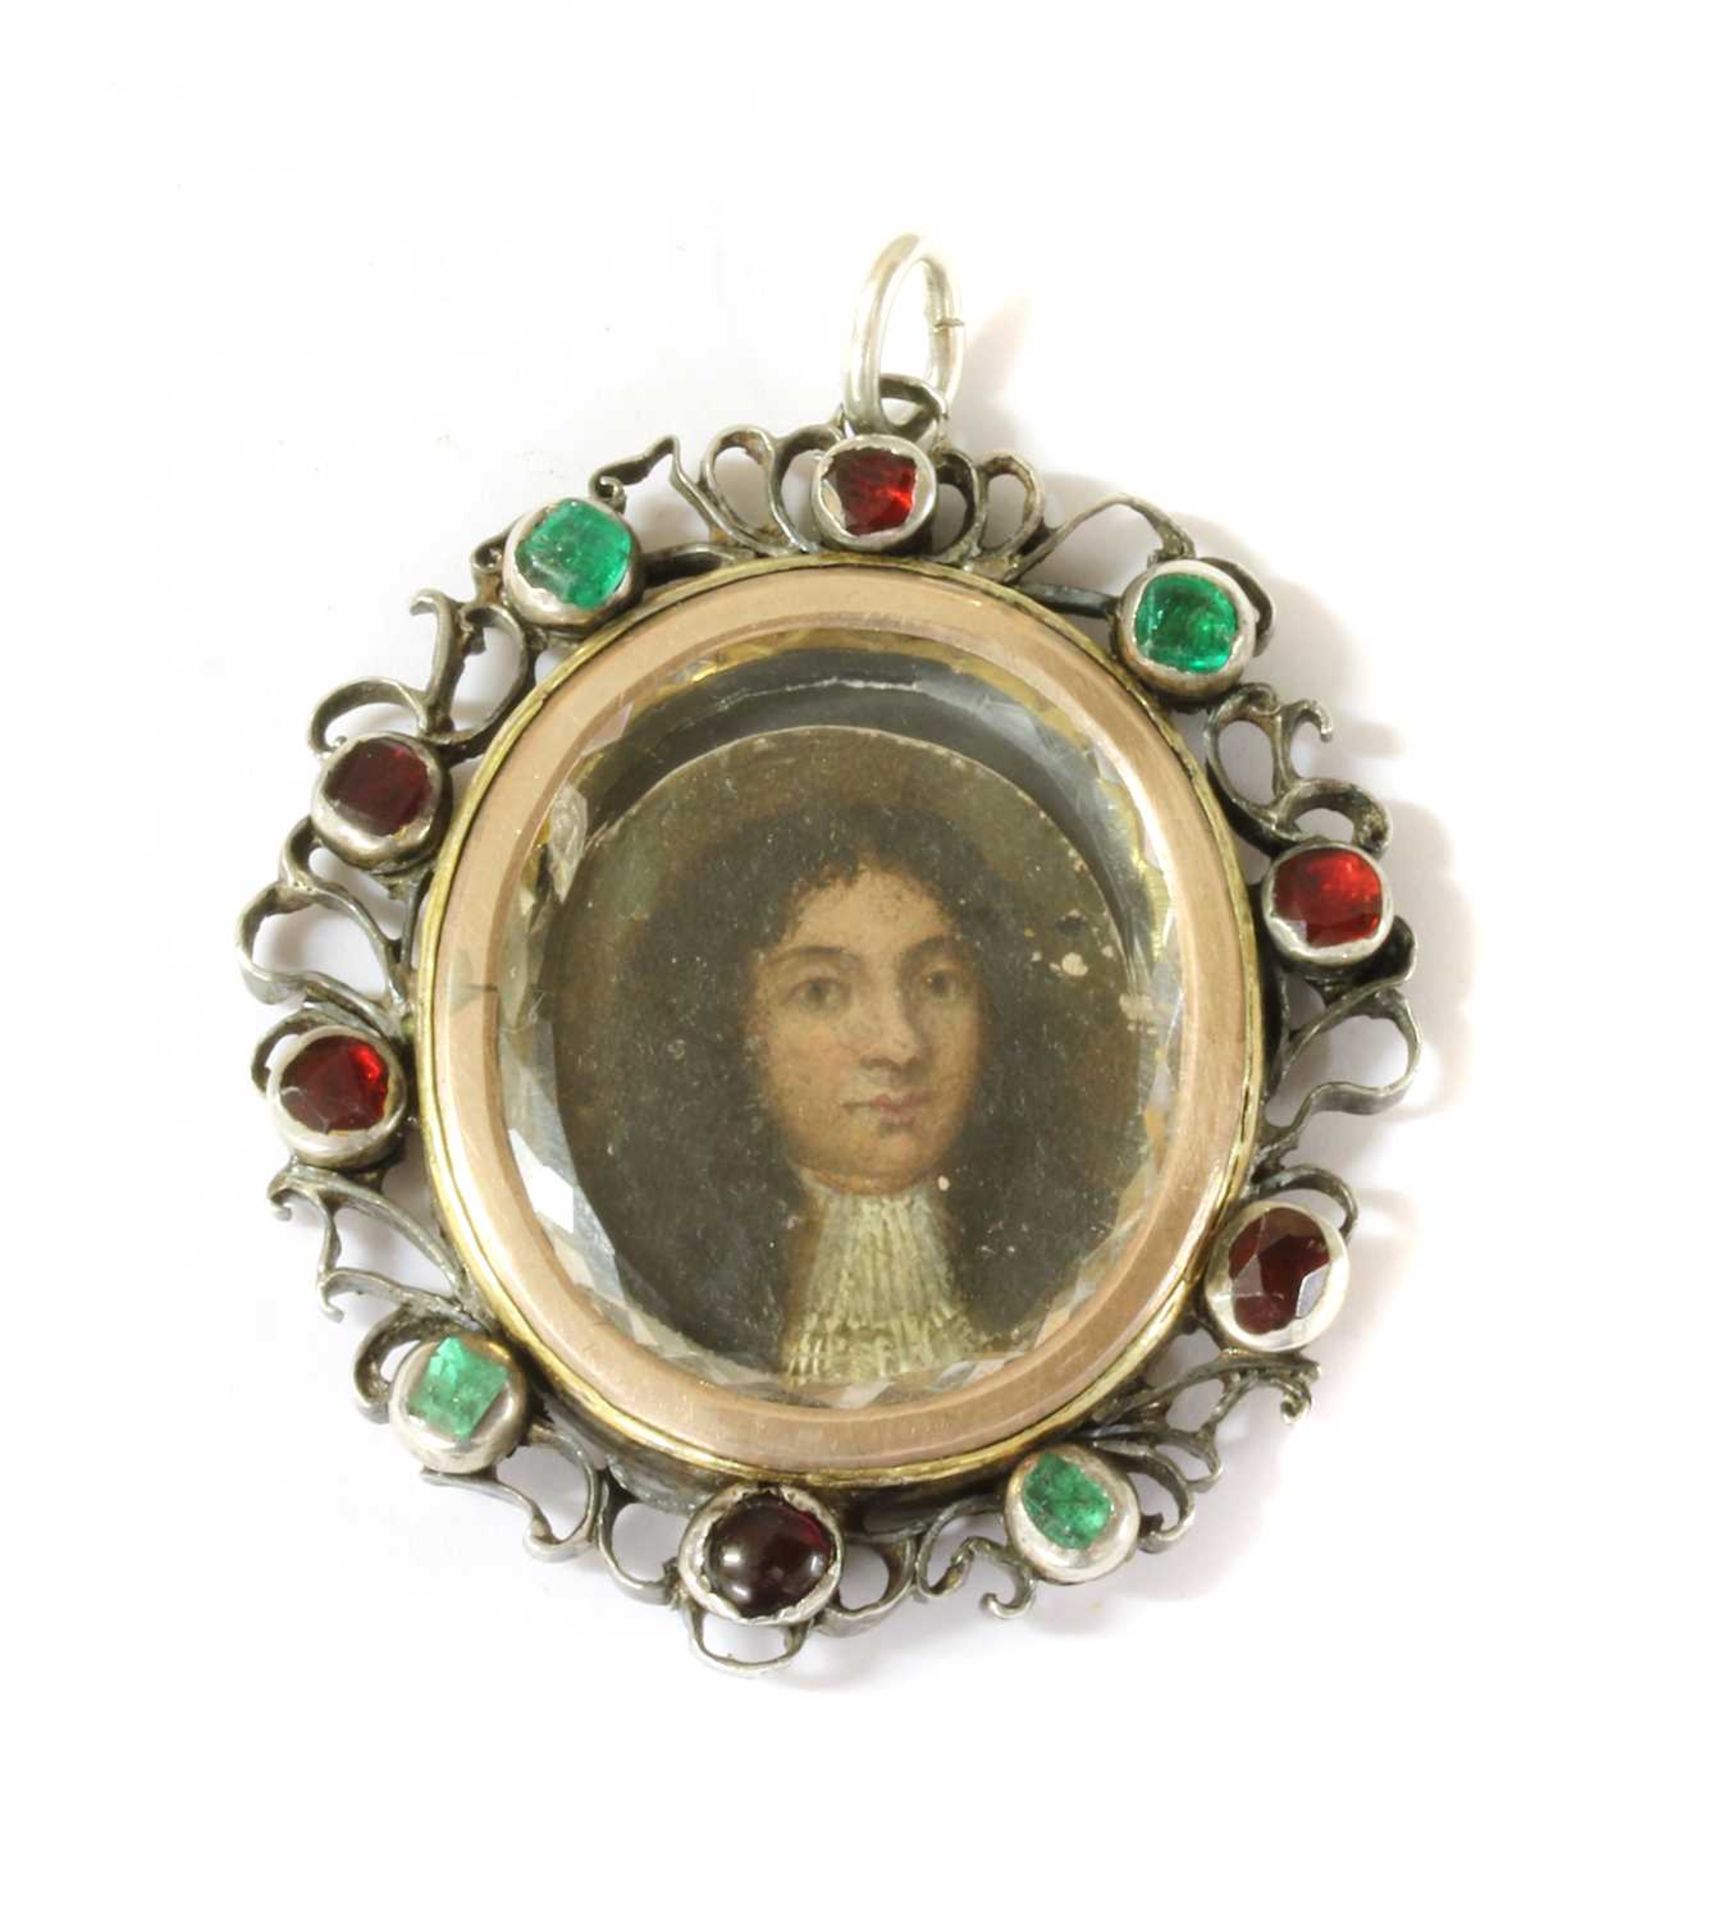 A silver mounted portrait miniature, 18th century,